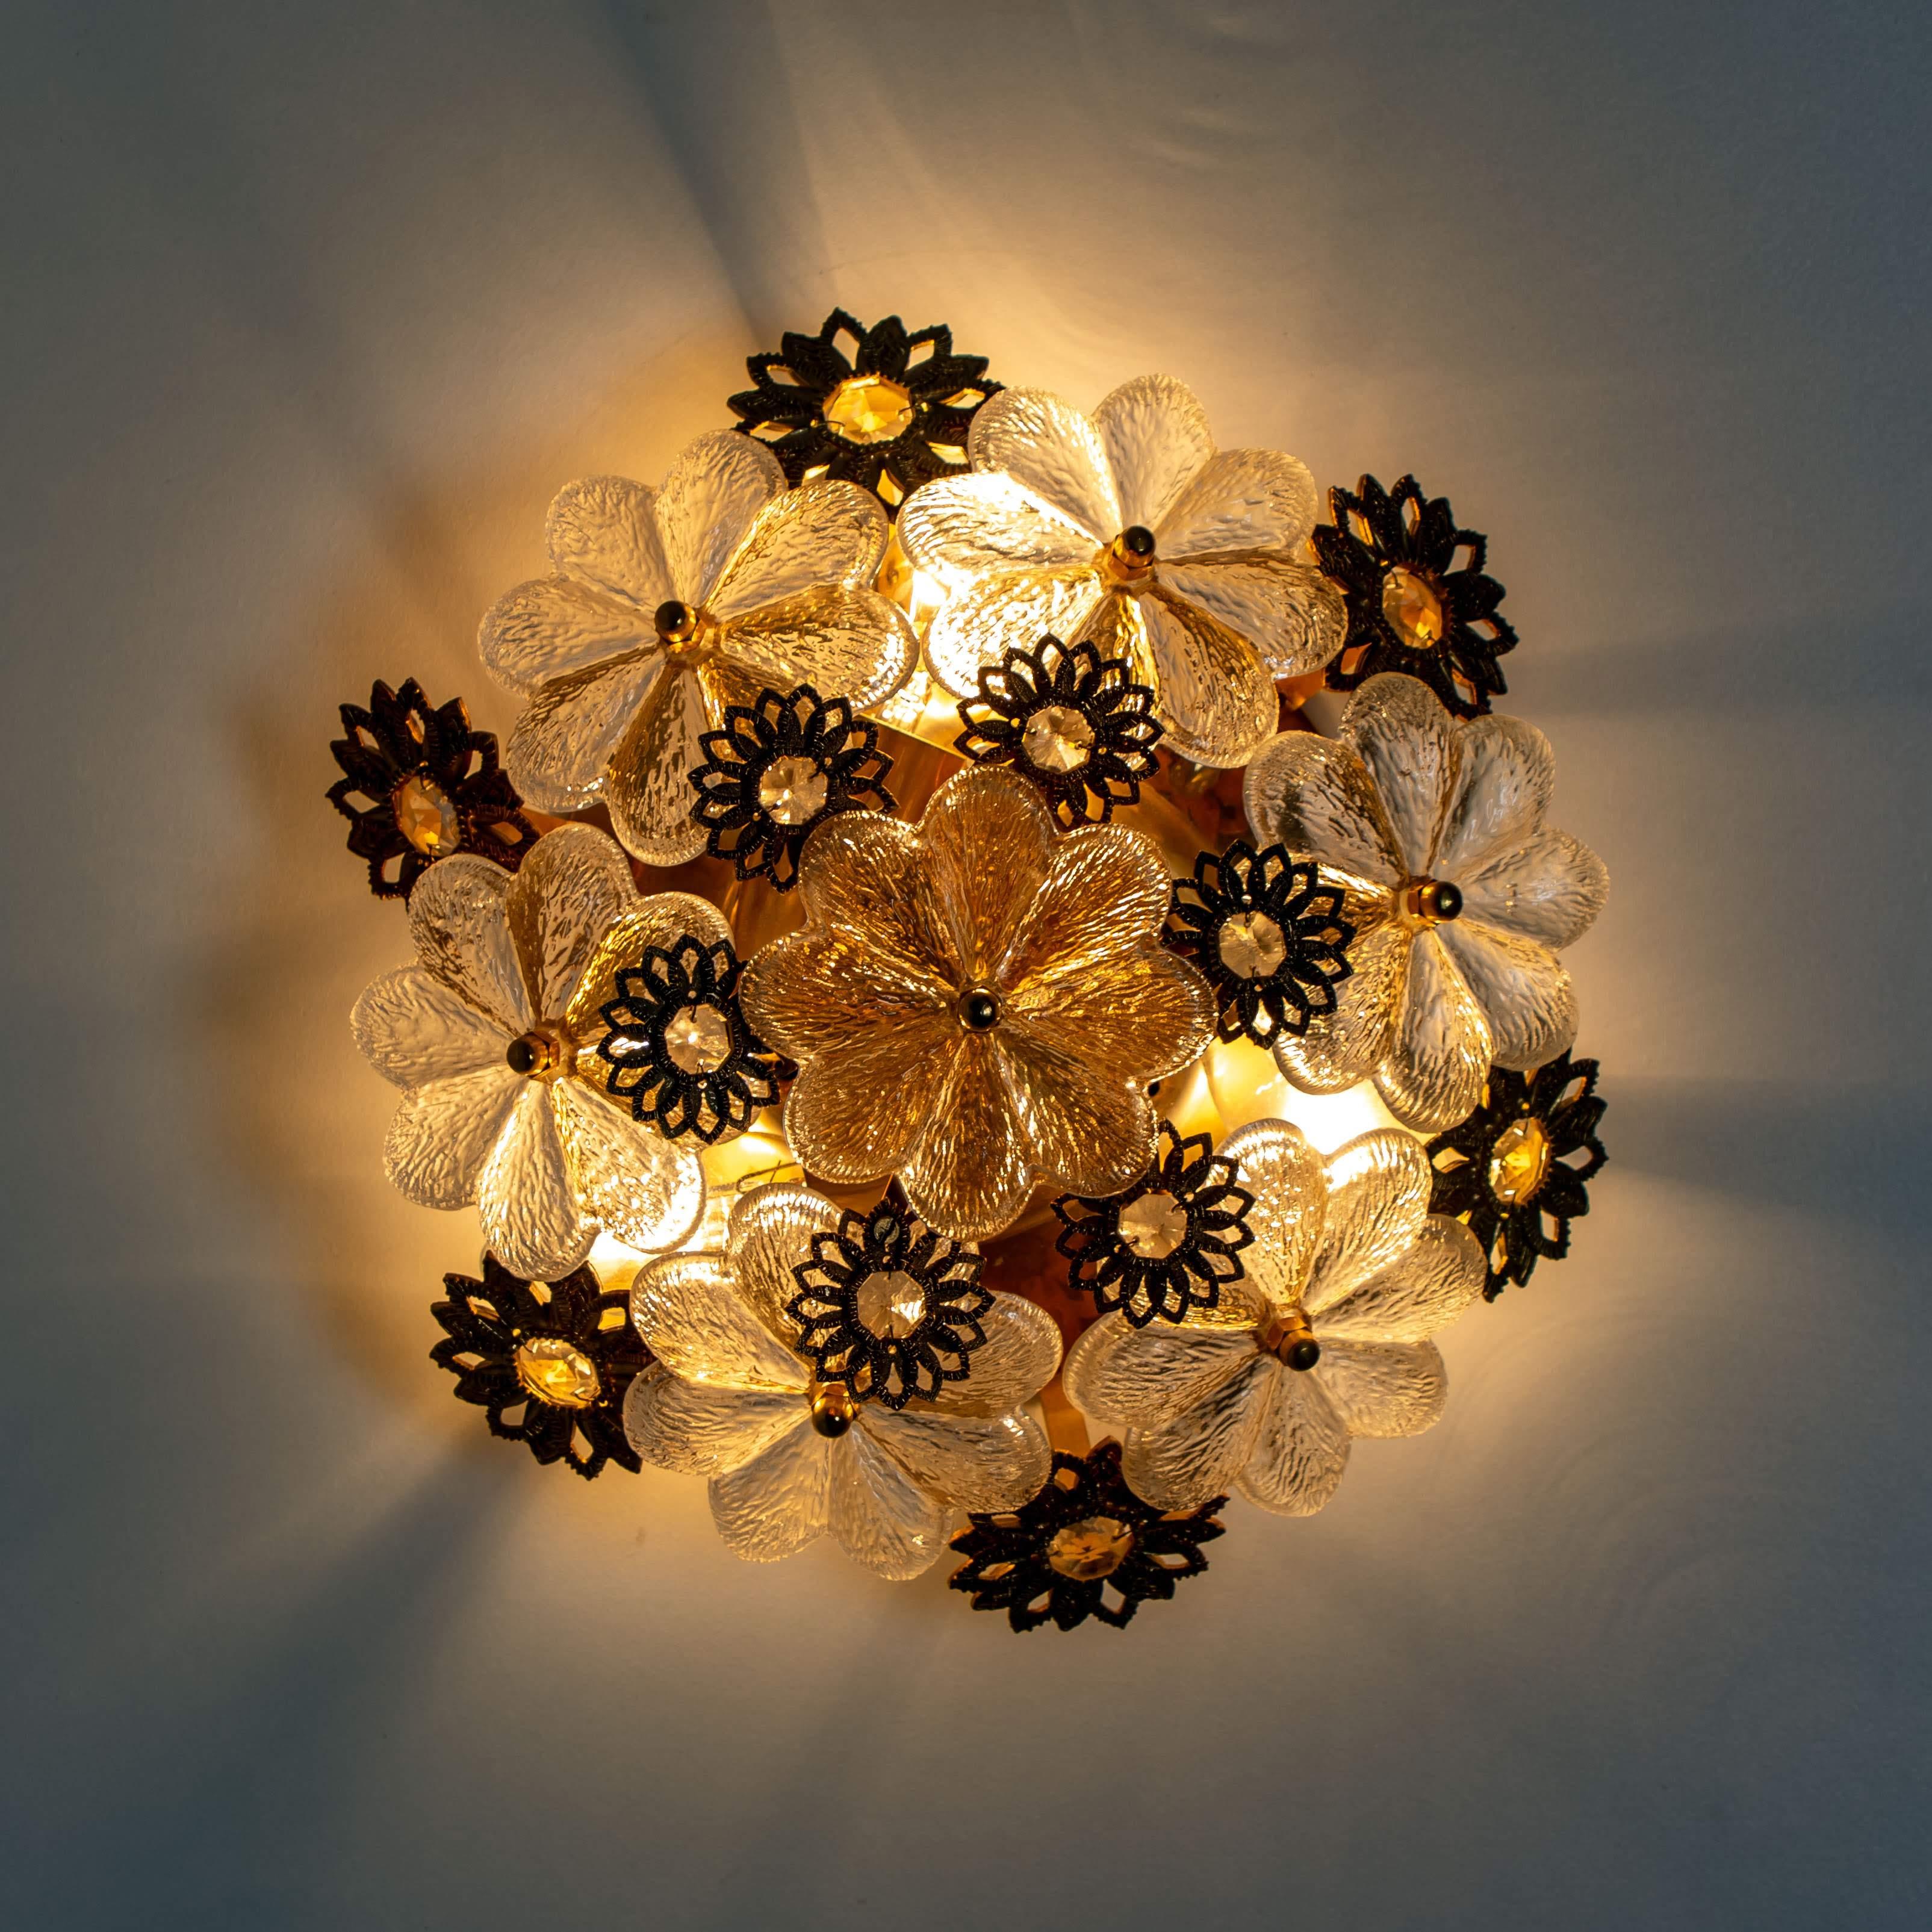 Stunning flower wall light/ flush mount by Palwa, Germany, circa 1965-1975. 
A luxurious of light fixture with beautifully cut flower crystals on a gold-plated brass frame.

In very good vintage condition. Cleaned, well wired and ready to use. He